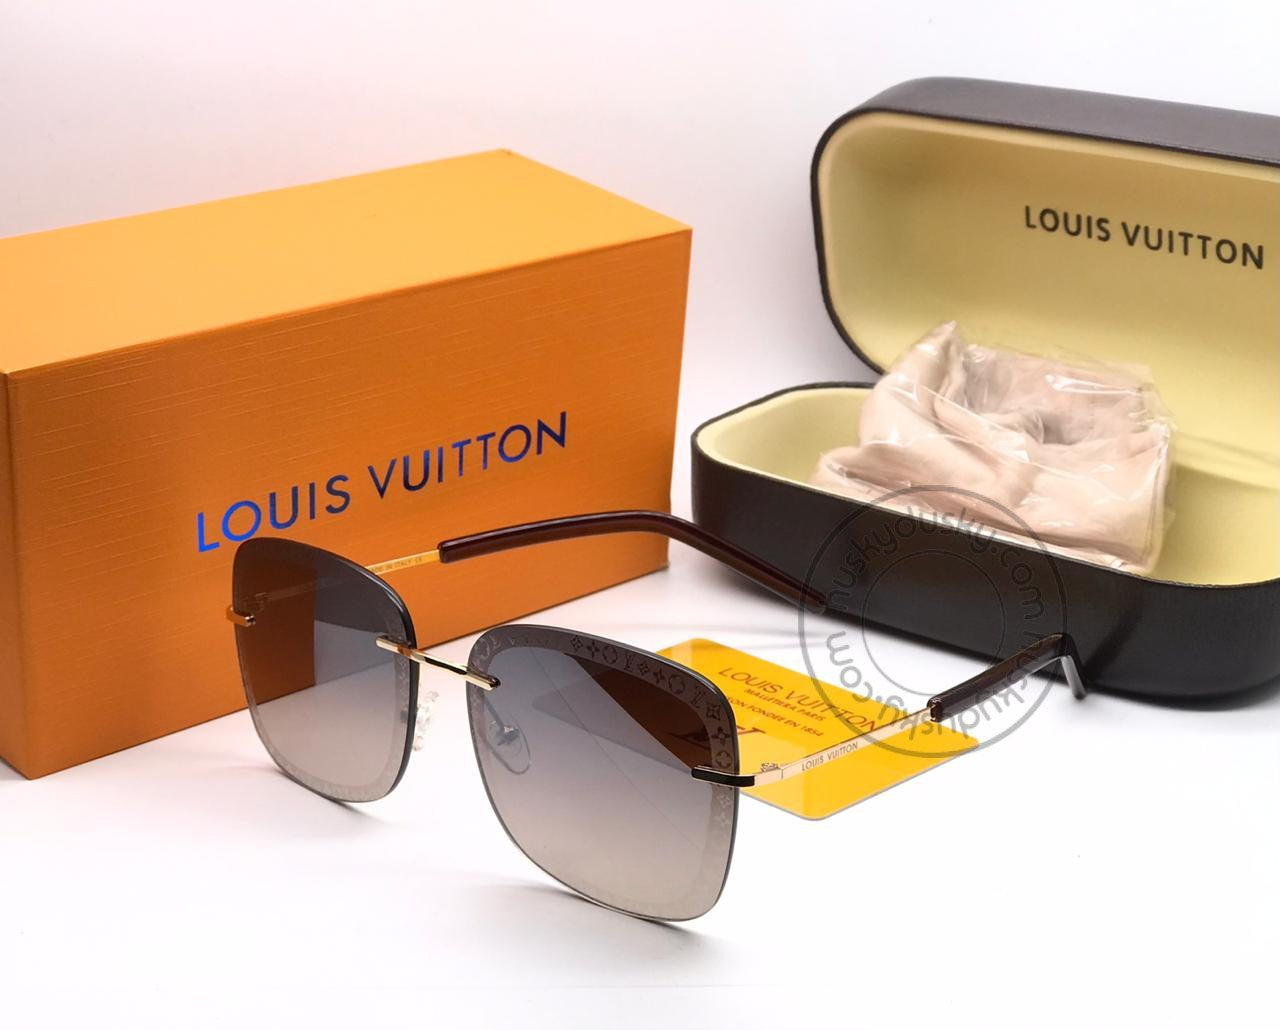 Louis Vuitton Branded Brown shade Glass Men's and Women's Sunglass for Man and Woman or Girls LV-142 Gold And Black Frame Unisex Gift Sunglass